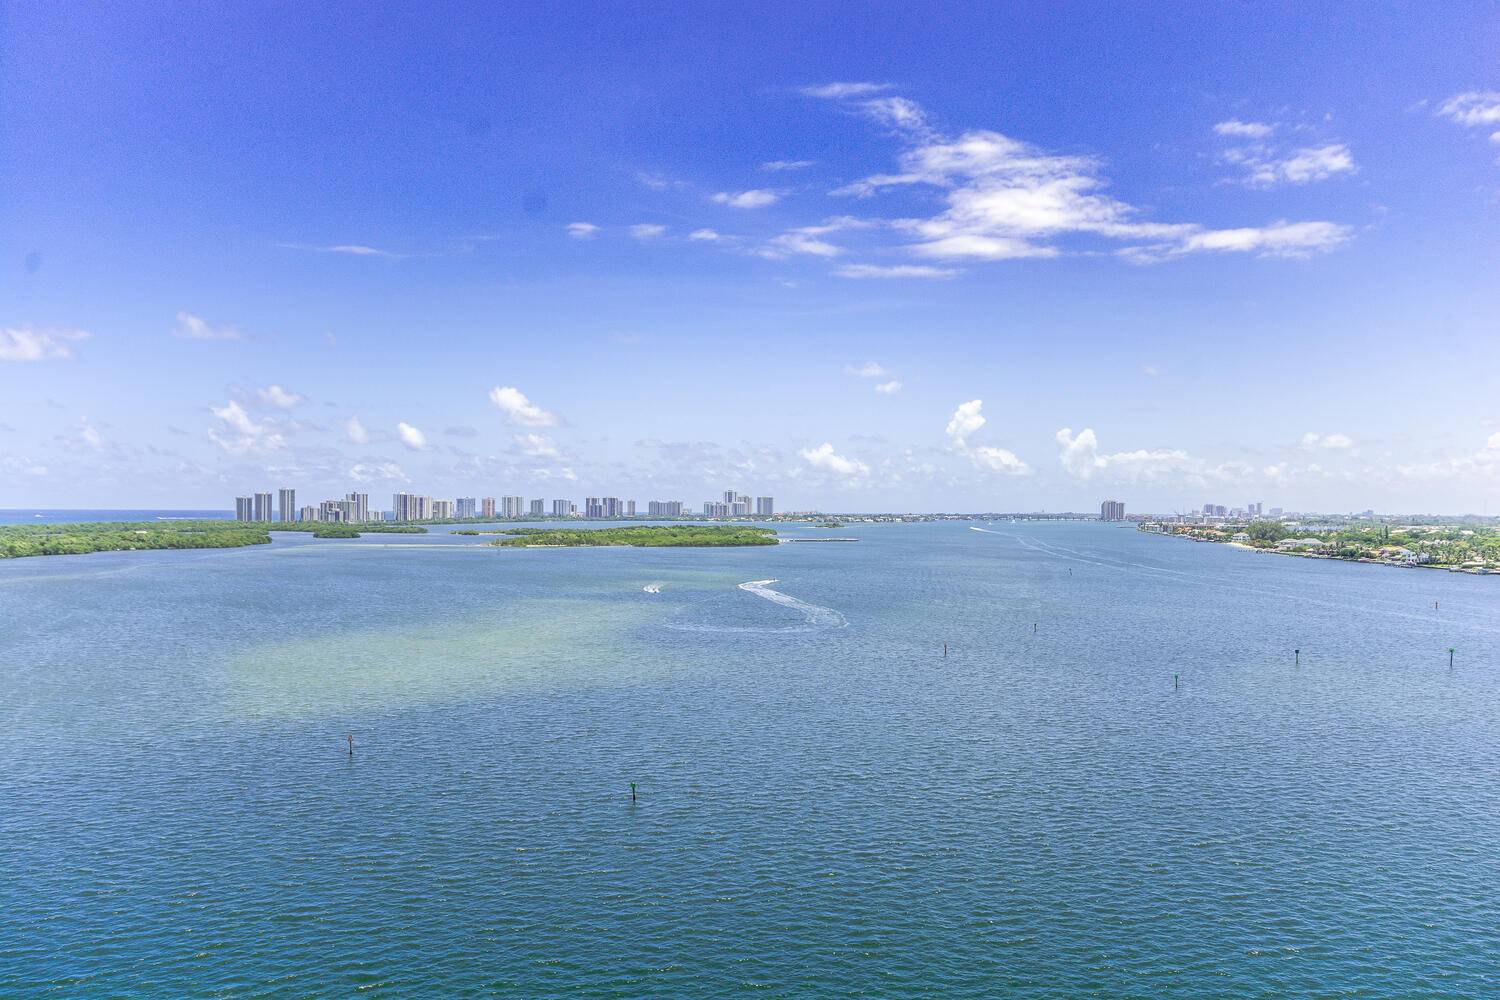 LUXURY WATERFRONT CONDO, FULLY REMODELED WITH THE HIGHEST FINISHES IN 2021.